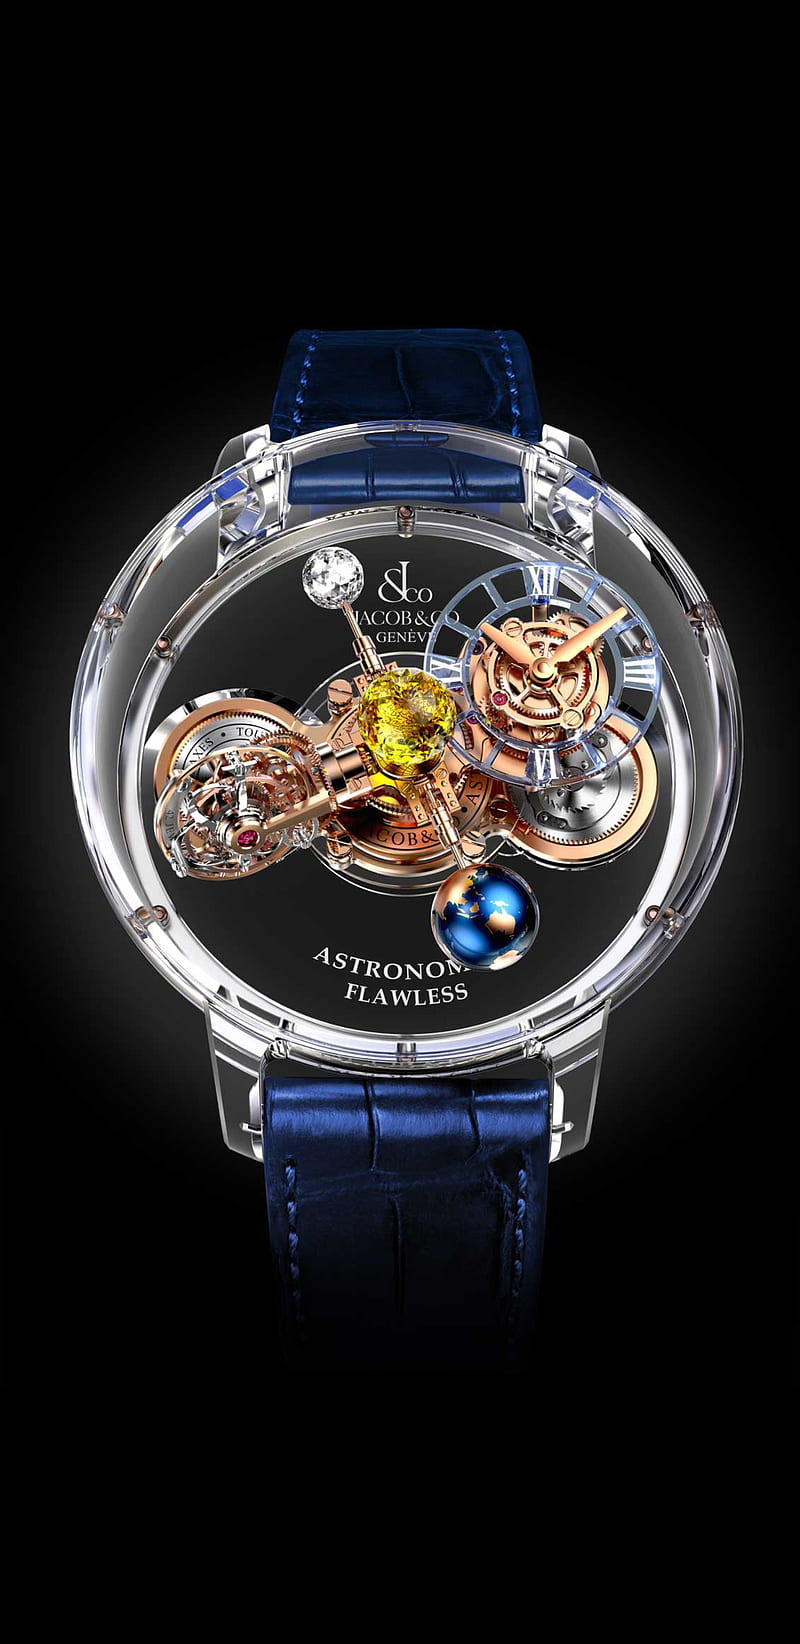 The Horological Universe Of the Jacob & Co Astronomia | The Fat Cat  Collective